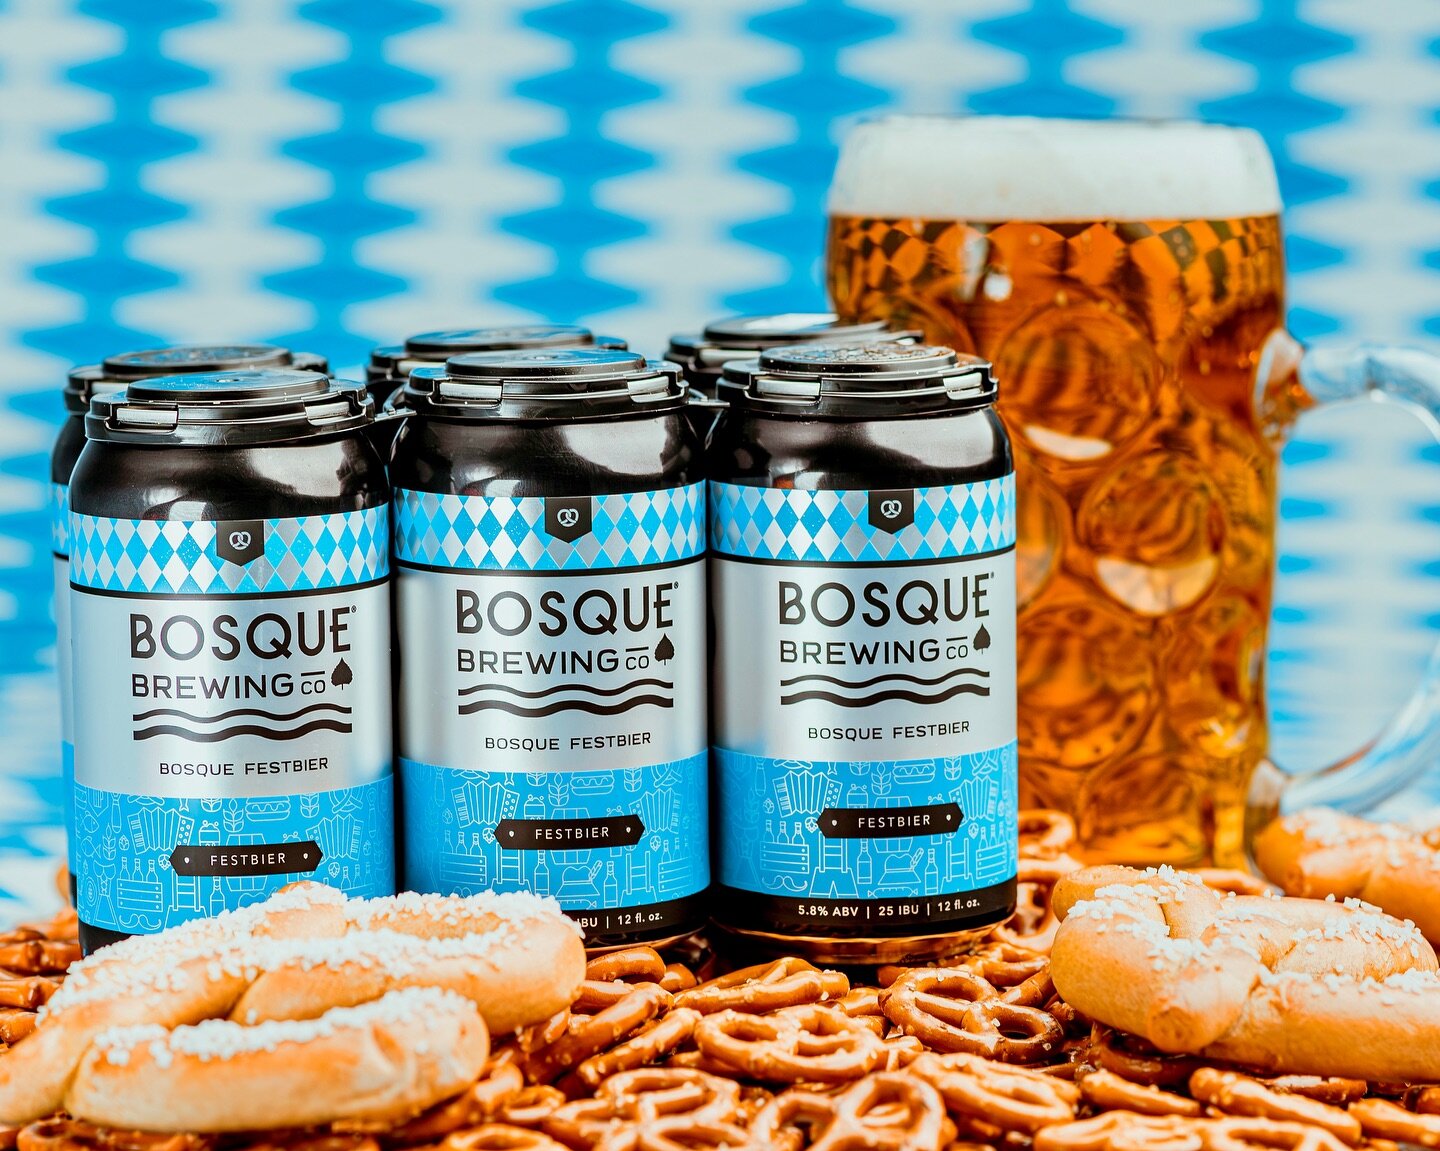 A beer so tasty, it&rsquo;s definitely worth &ldquo;prosting&rdquo; about! 
😉🤳🍻

Bosque Festbier {5.8 ABV | 25 IBU}

This modern-day take on a German Oktoberfest has a strong Vienna malt backbone with some Munich malt for added flavor and color. I